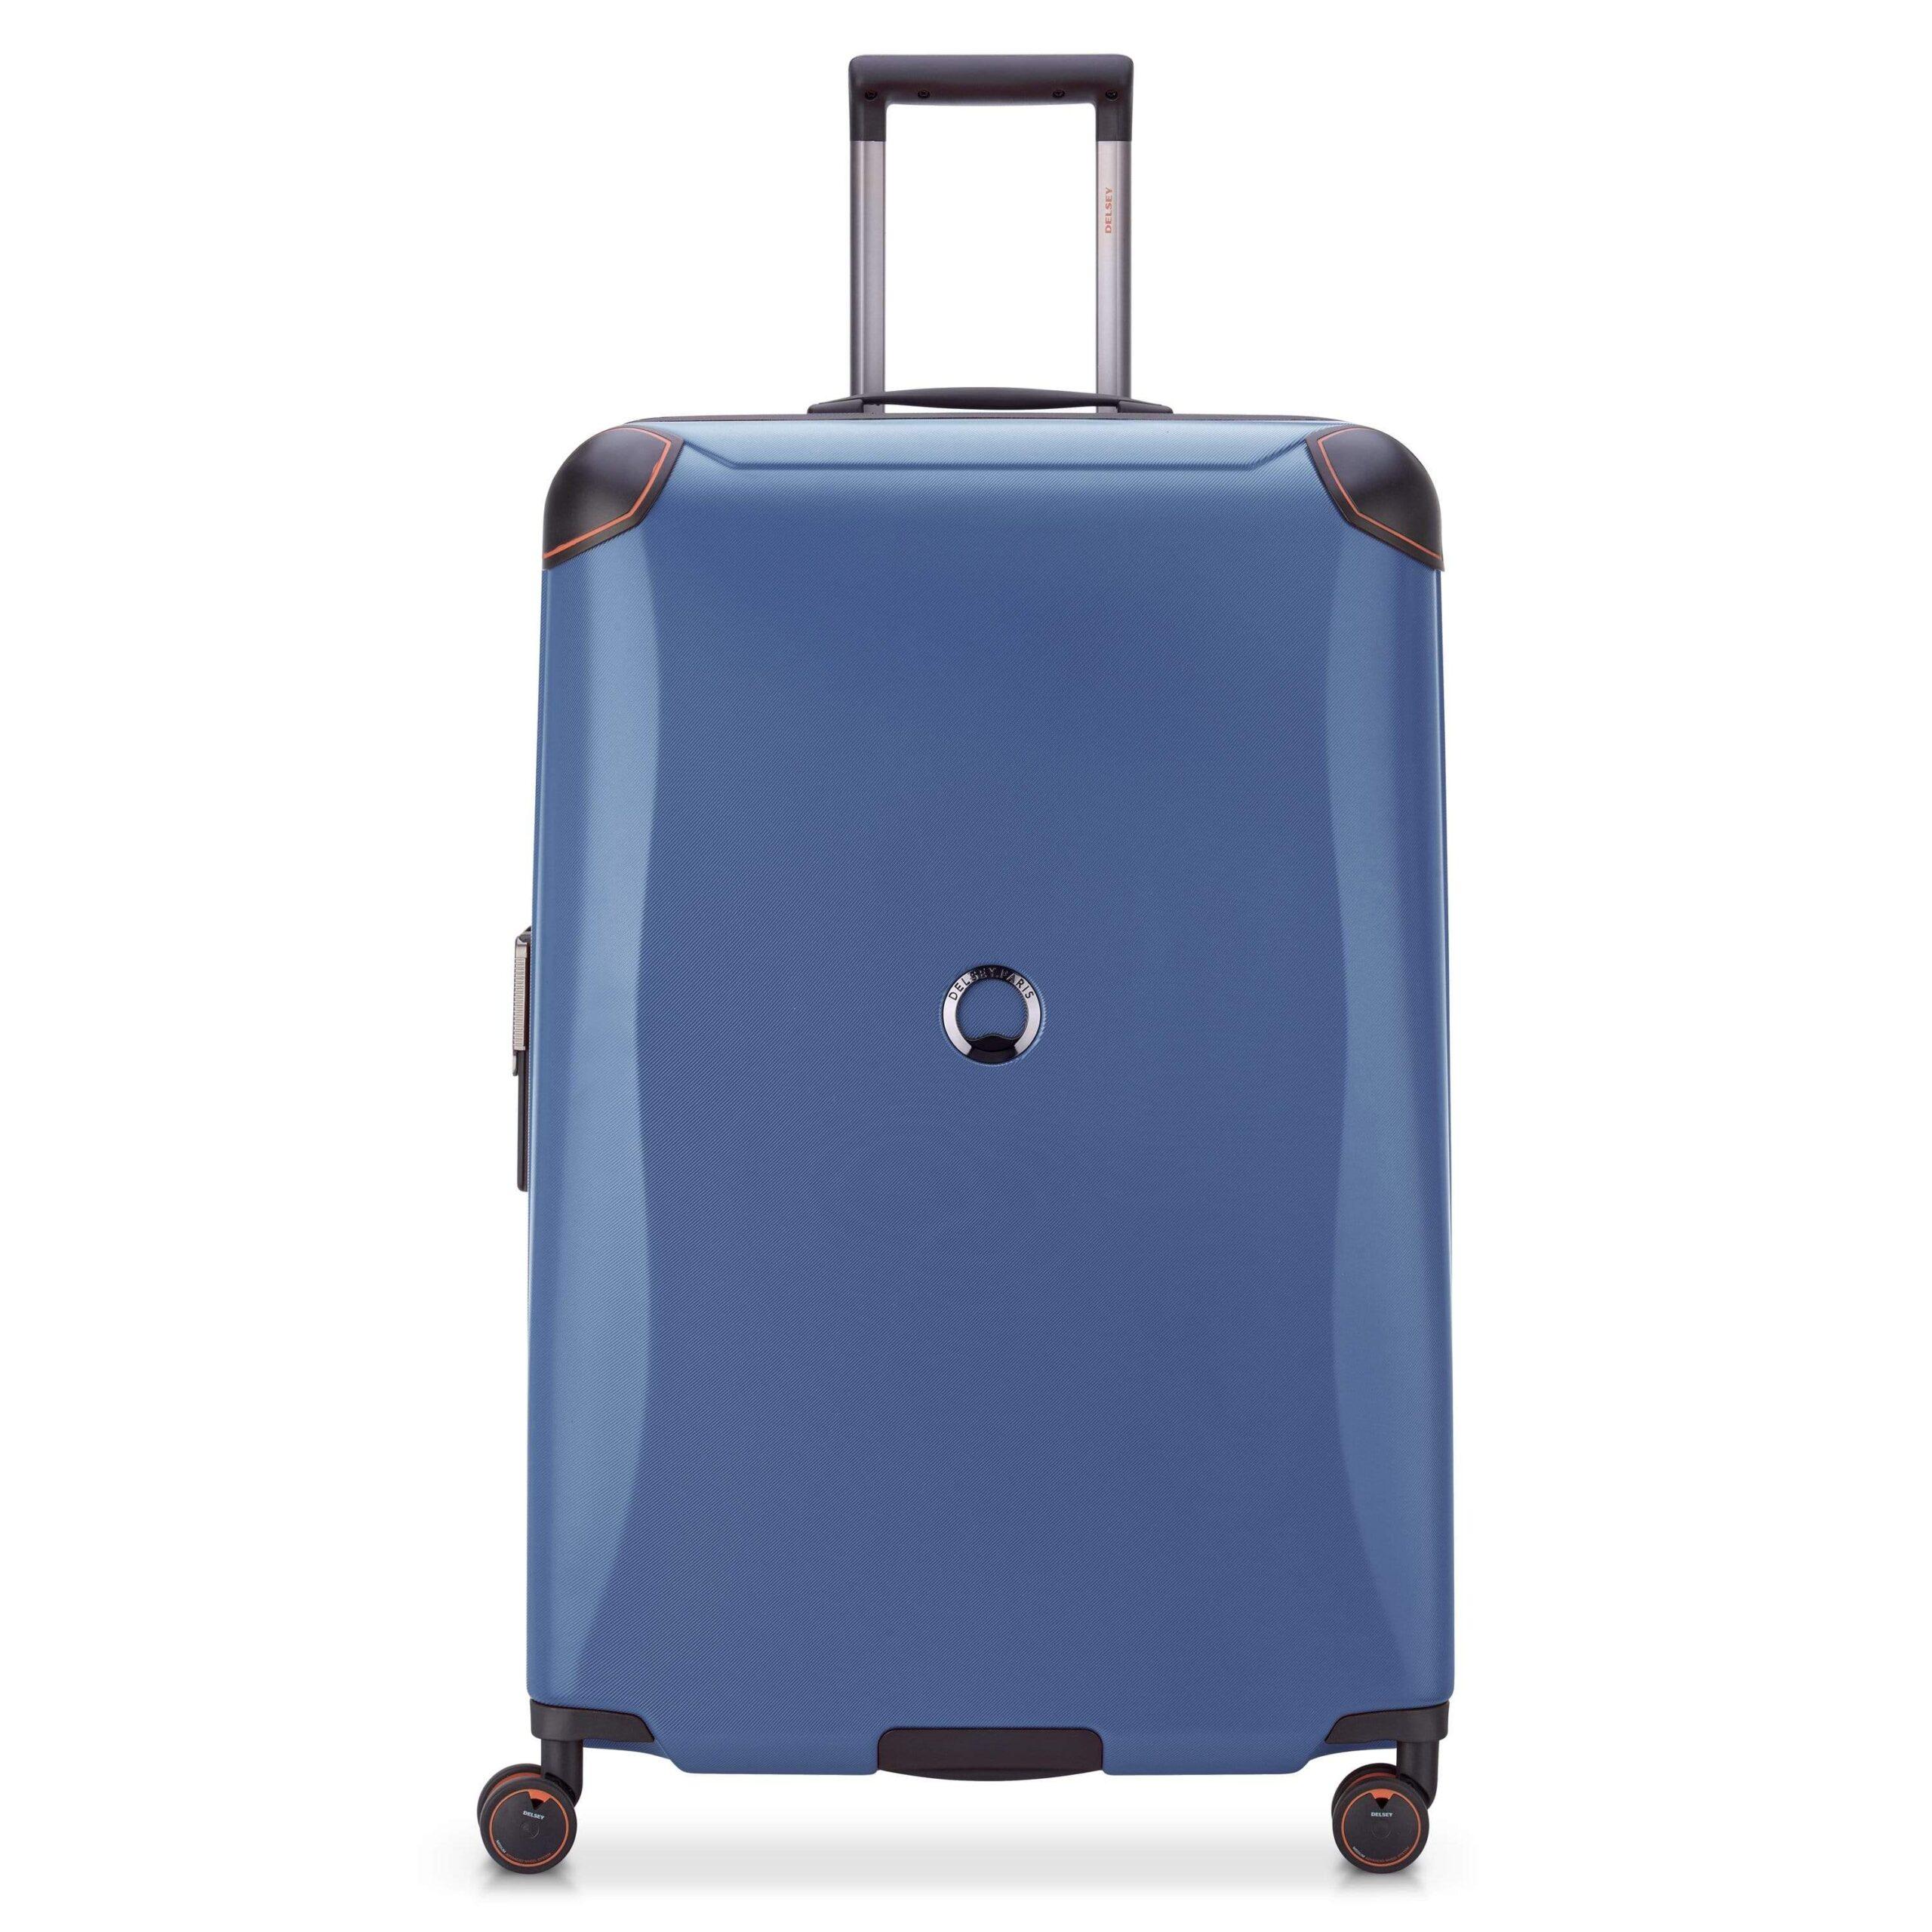 Delsey Cactus 78cm Hardcase 4 Double Wheel Check-In Luggage Trolley Blue - 00218082102